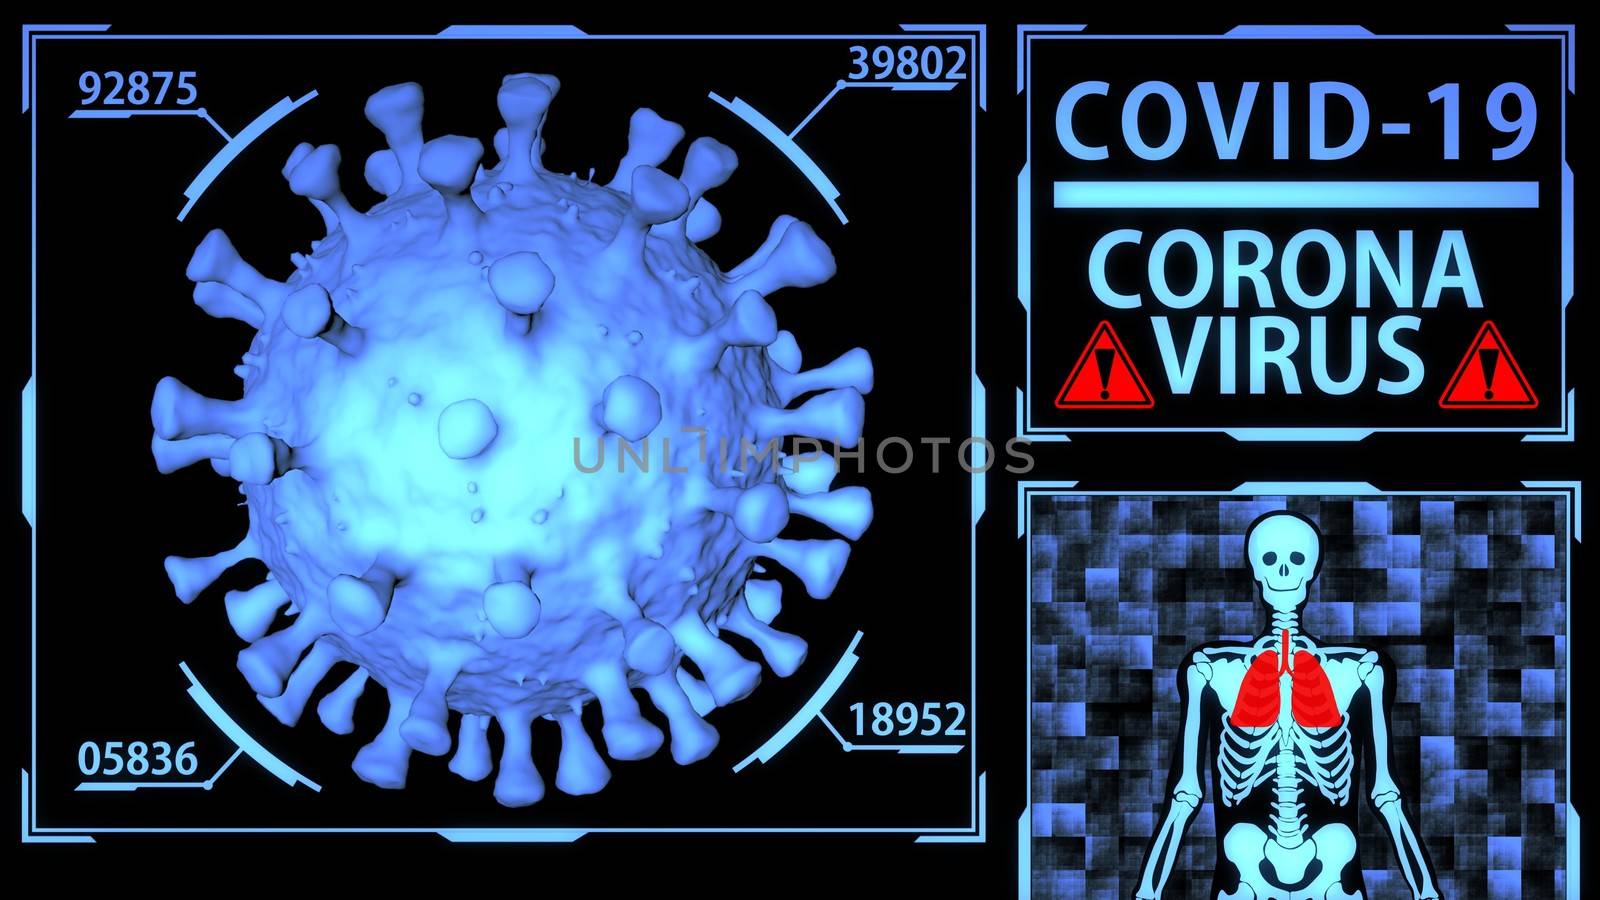 Coronavirus/Covid-19 3D Model in Futuristic Digital Medical HUD with Body Scanning details Background